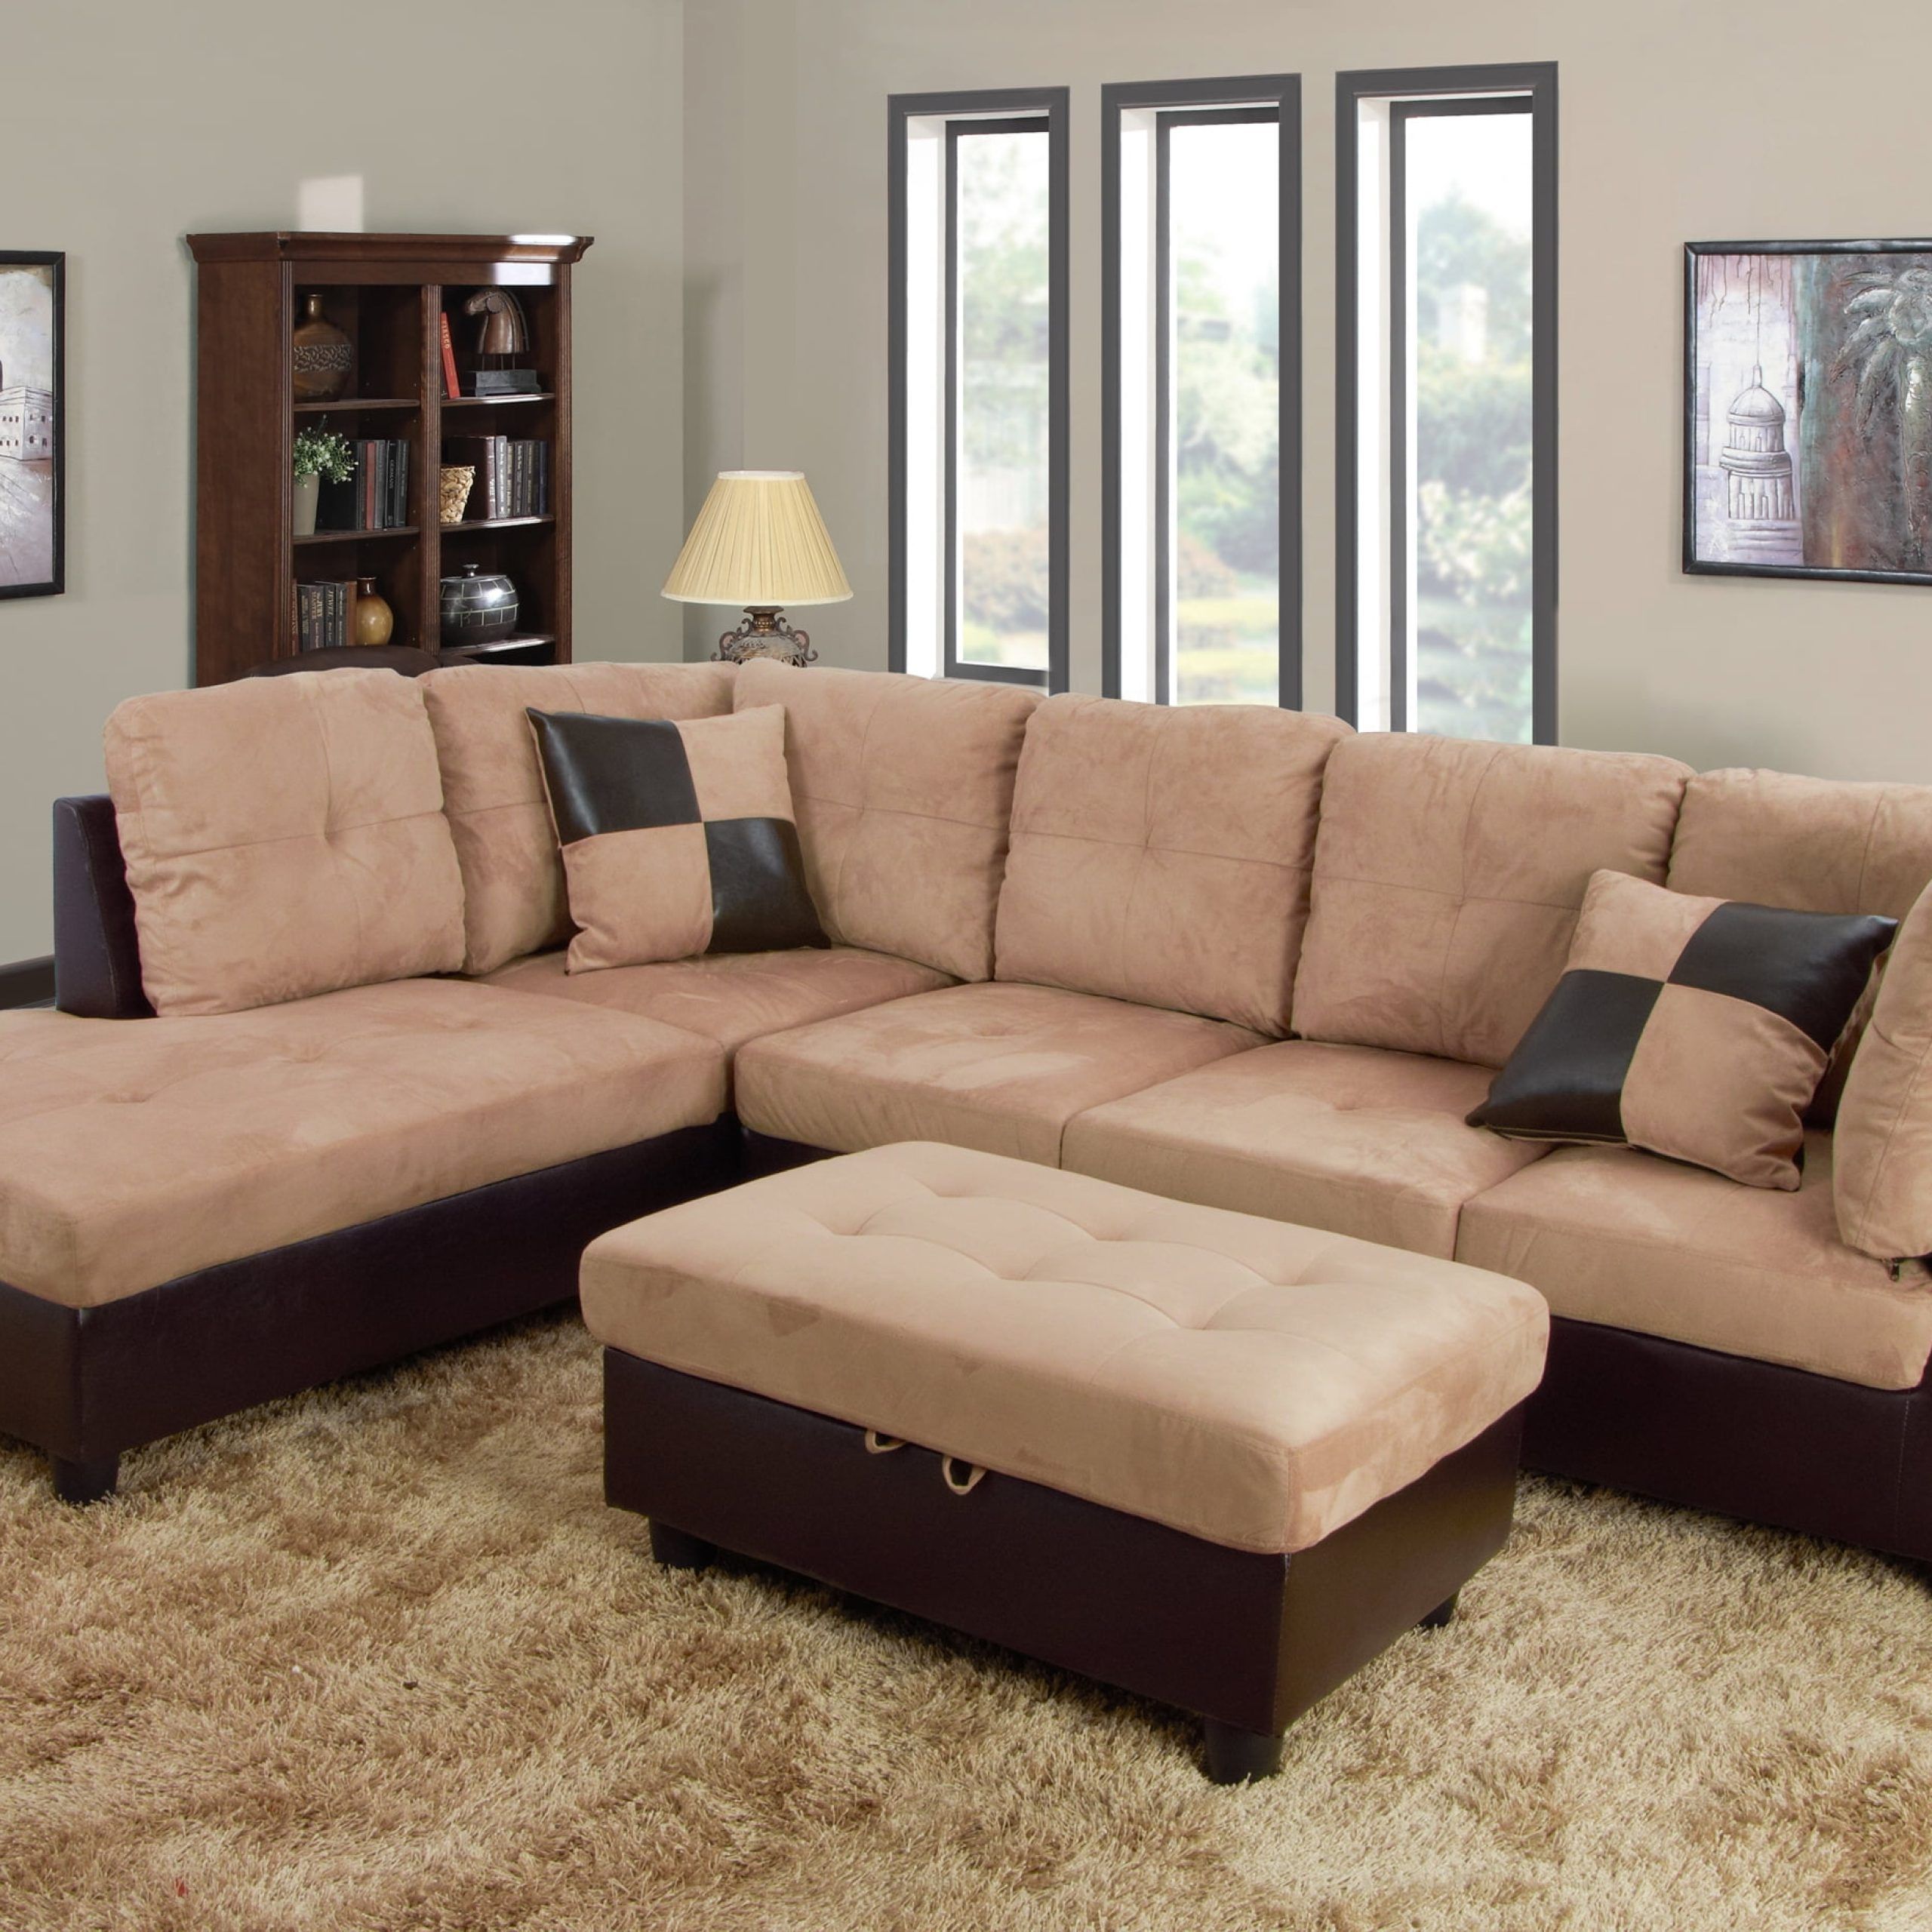 Aycp Furniture 3pcs L Shape Sectional Sofa Set, Left Hand Facing Chaise Inside Small L Shaped Sectional Sofas In Beige (Gallery 20 of 21)